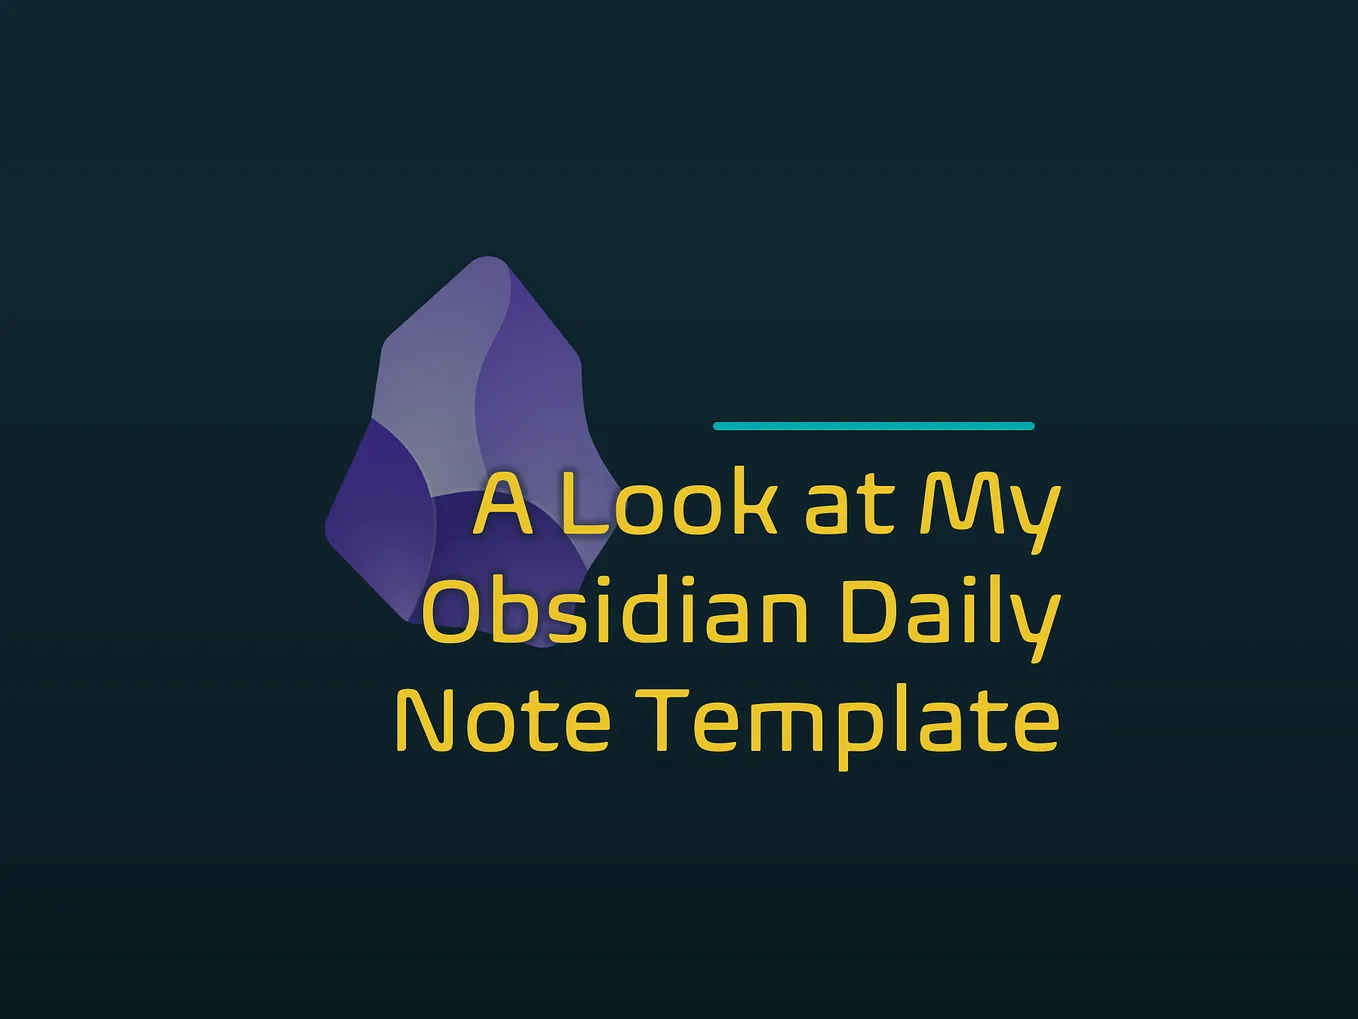 A Look at My Obsidian Daily Note Template